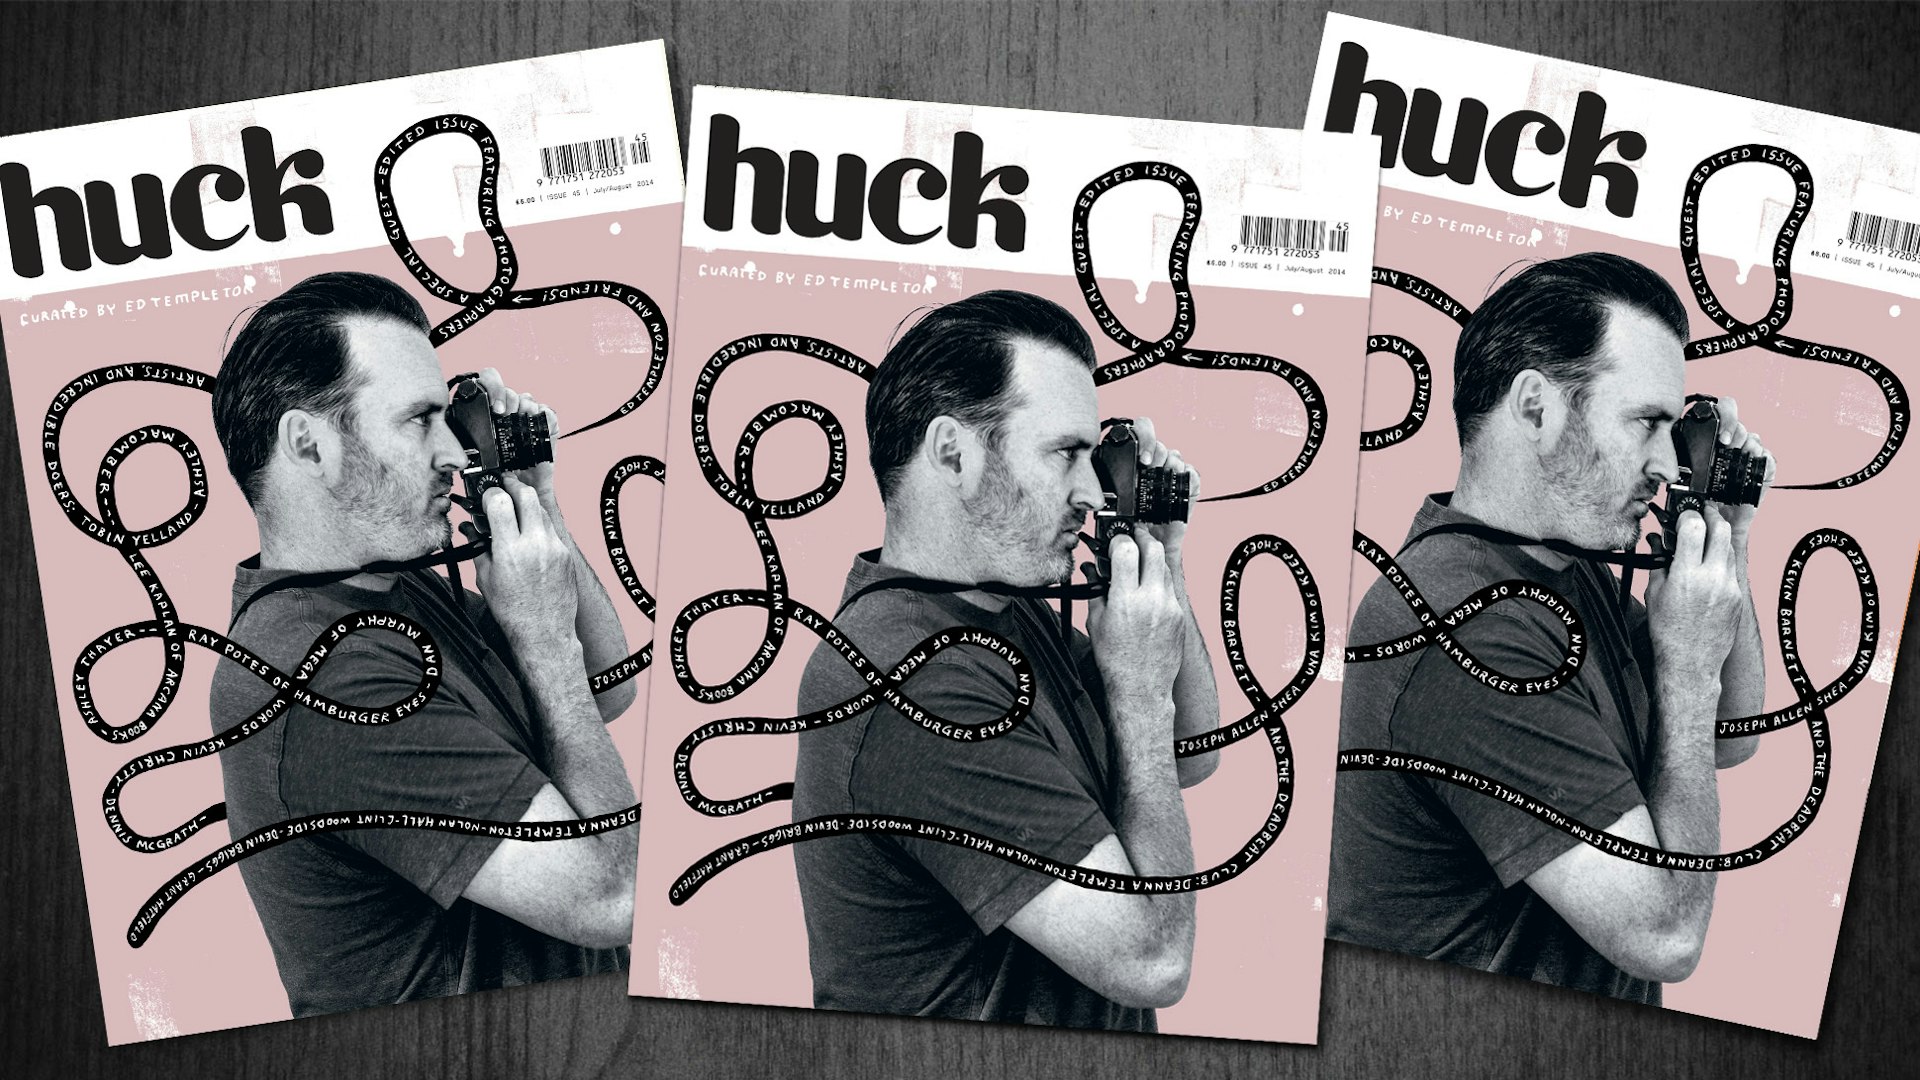 Huck 45 - The Ed Templeton Curated Issue